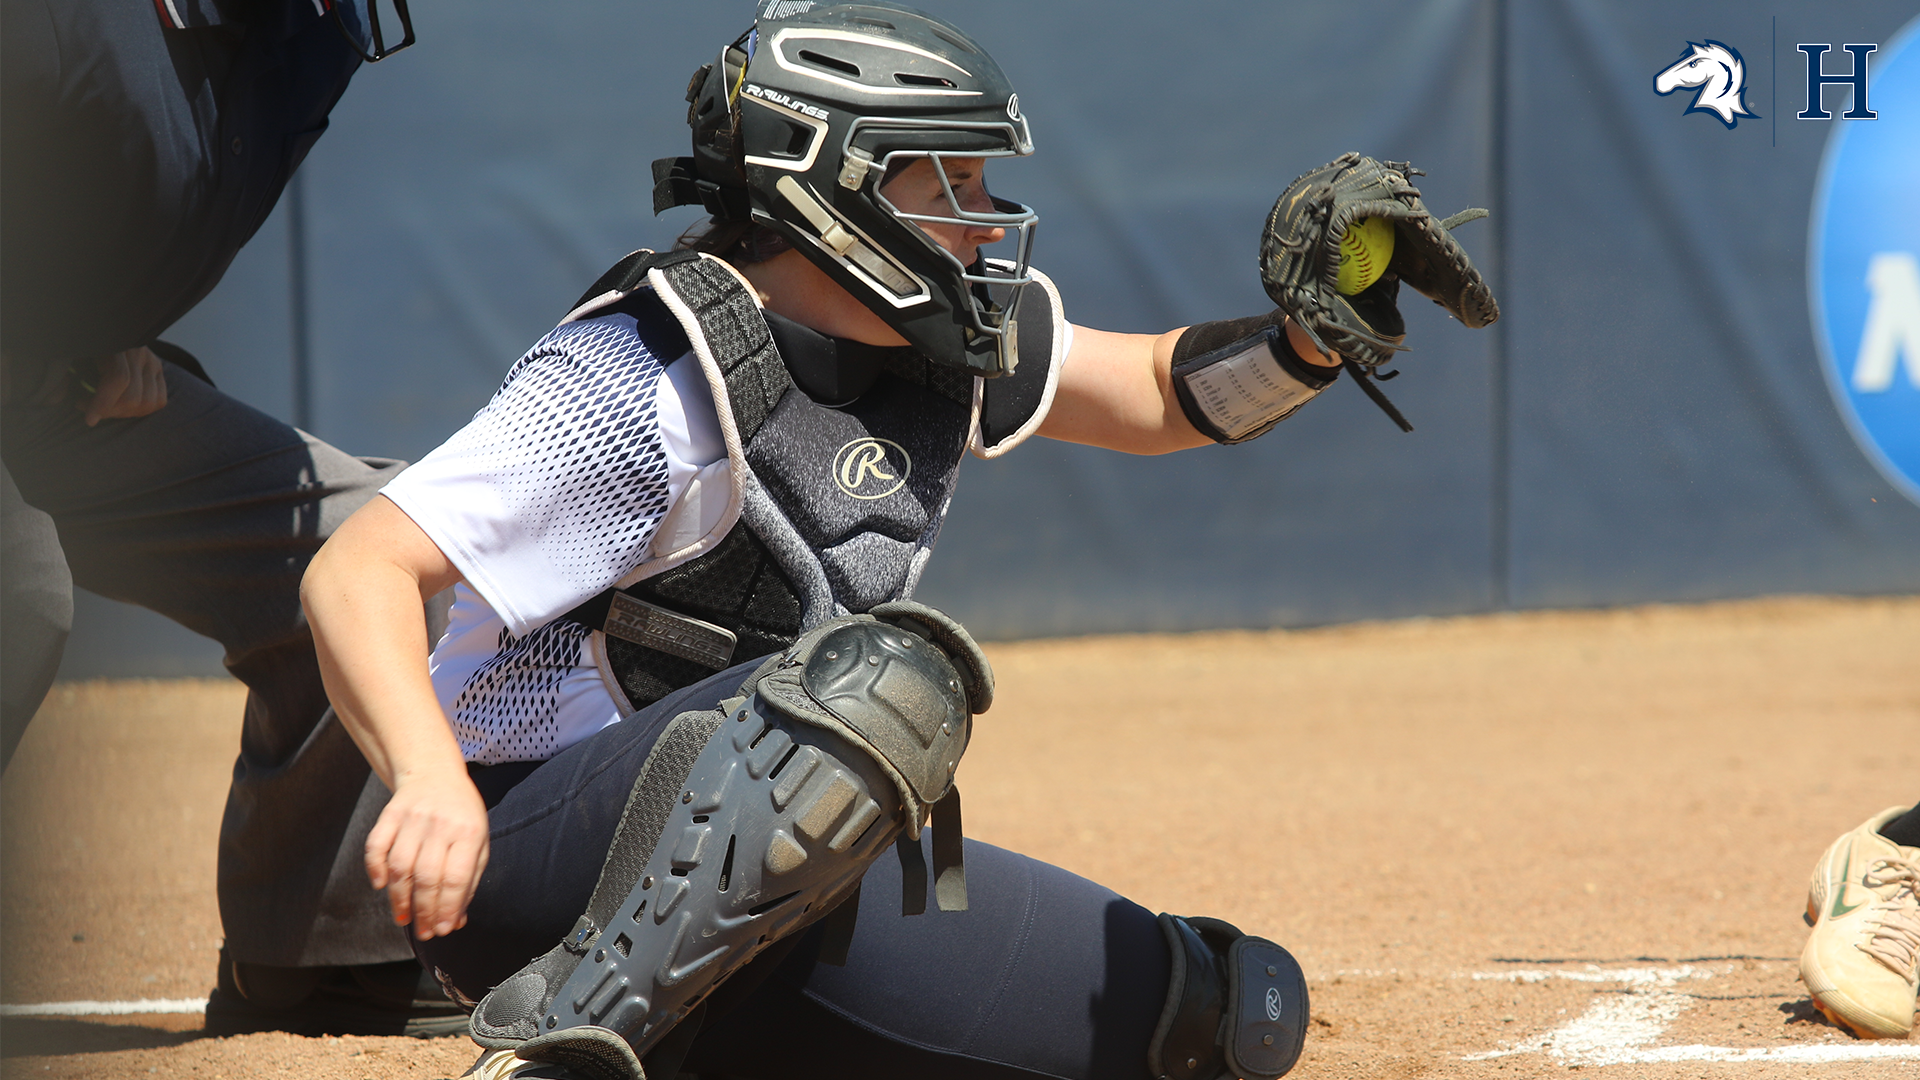 Charger softball team adds second camp for July 21